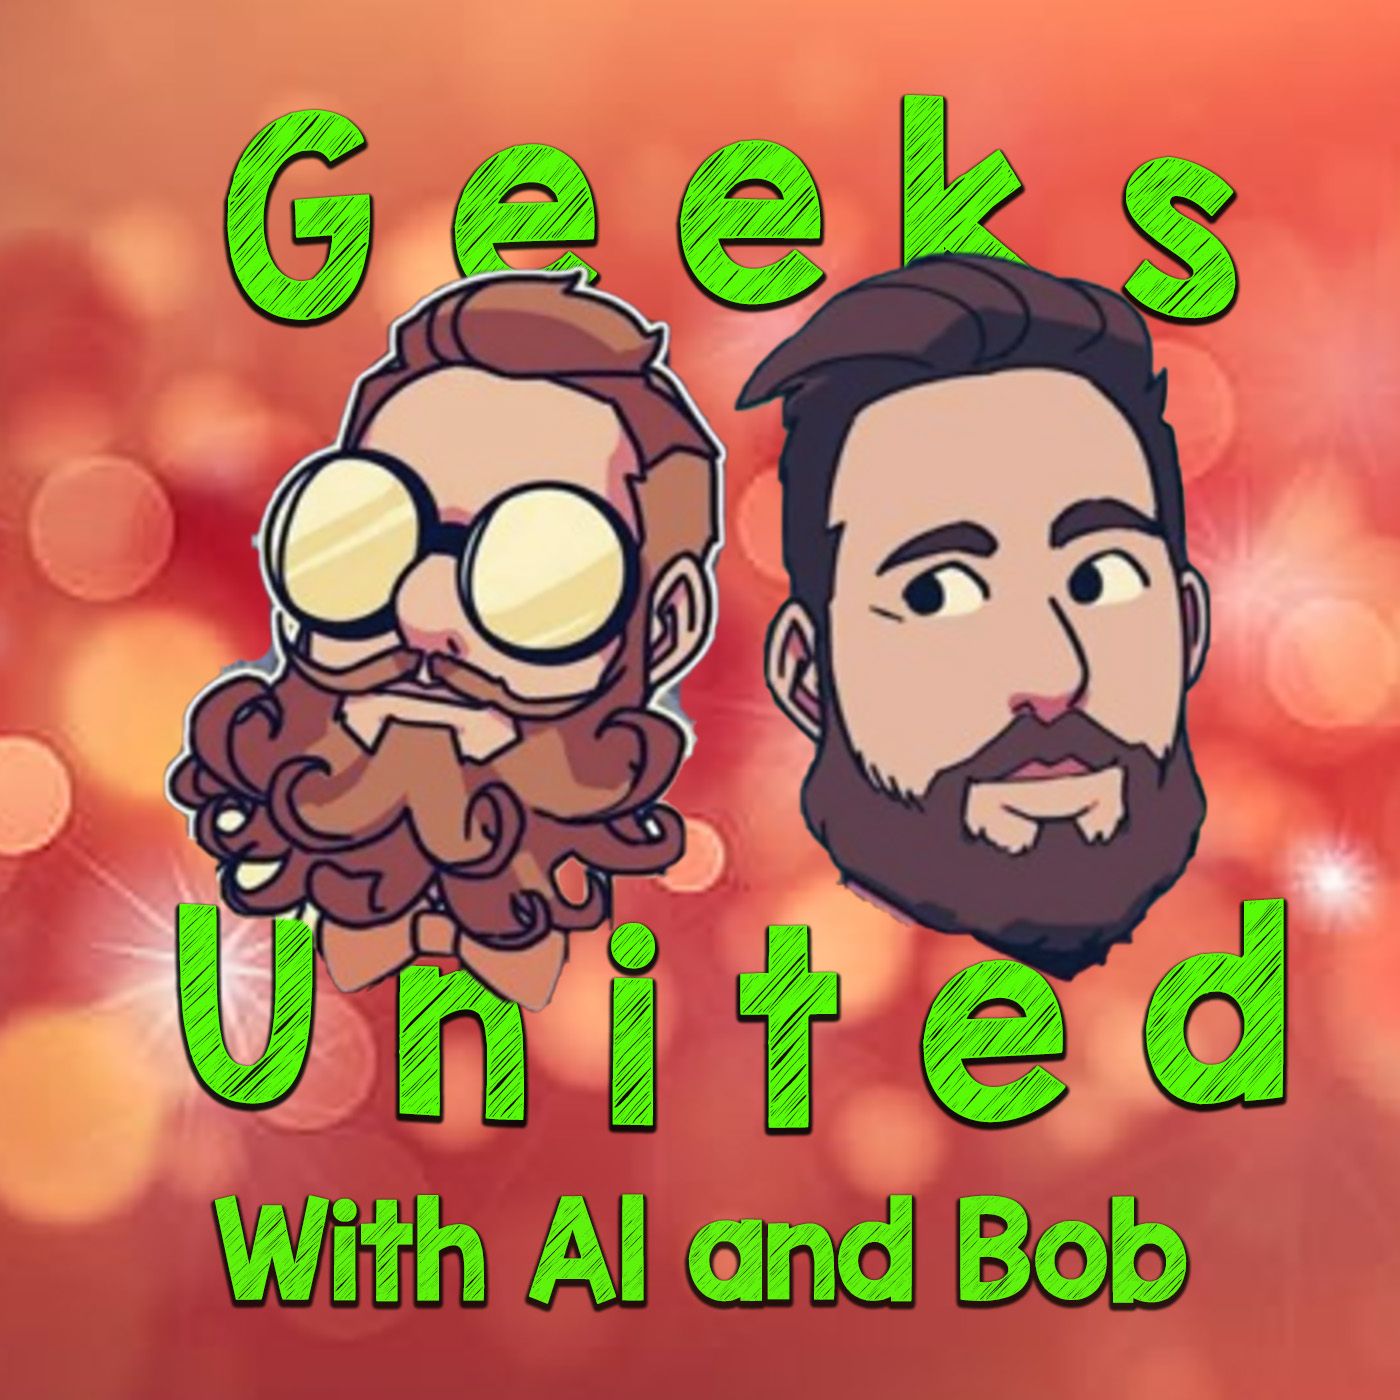 Geeks United with Al and Bob!